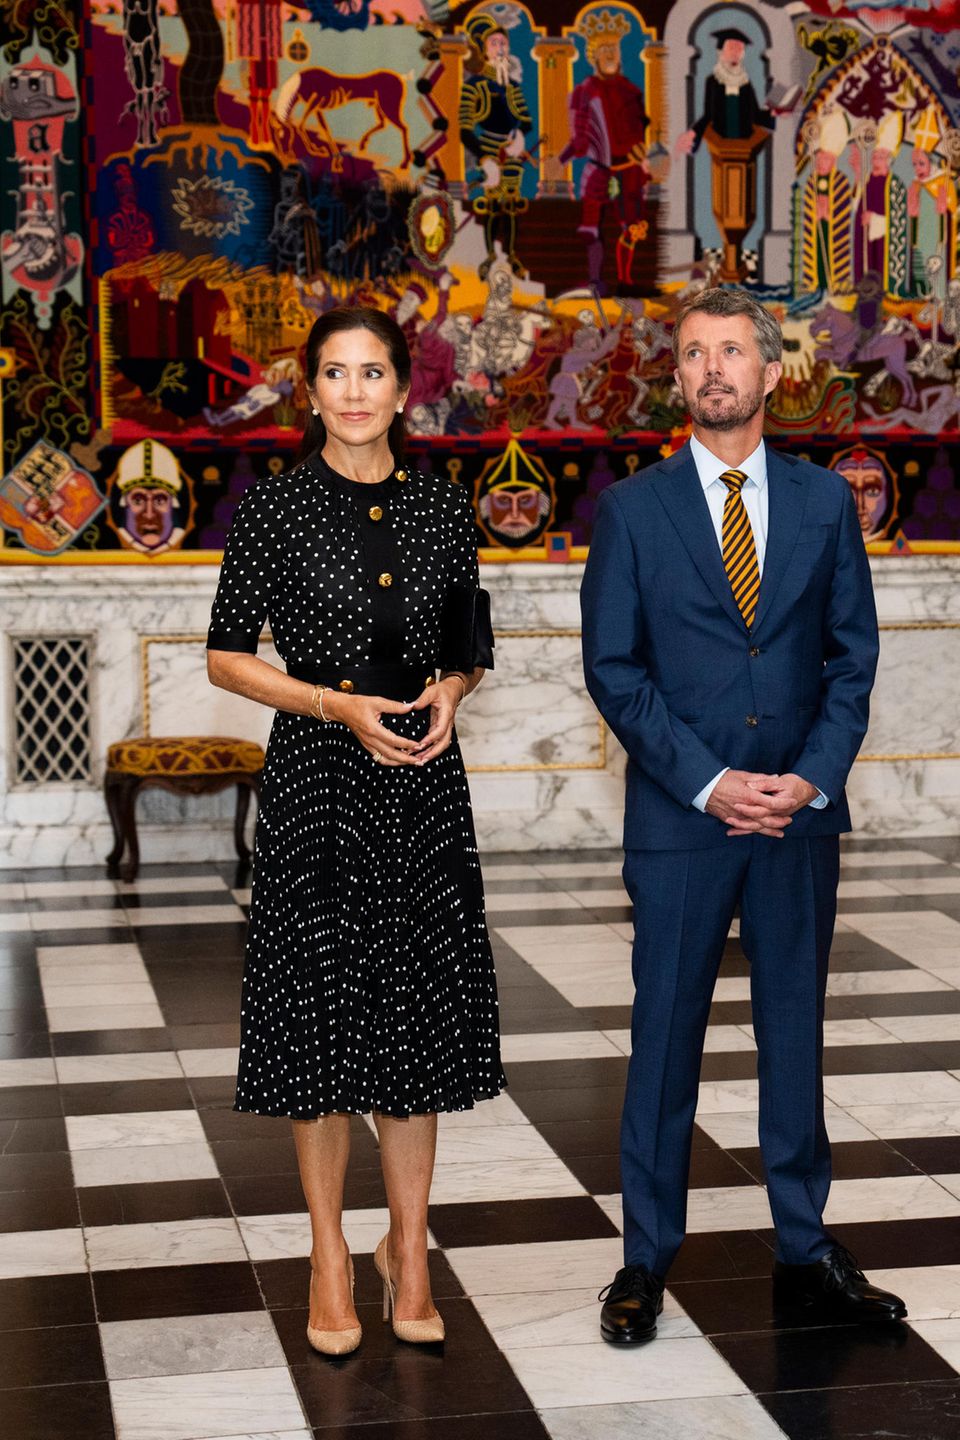 Queen Mary and King Frederik: At the reception for the Ukrainian presidential couple in the Knights' Hall at Christiansborg Palace in Copenhagen in 2023, they will appear together as the crown prince couple.